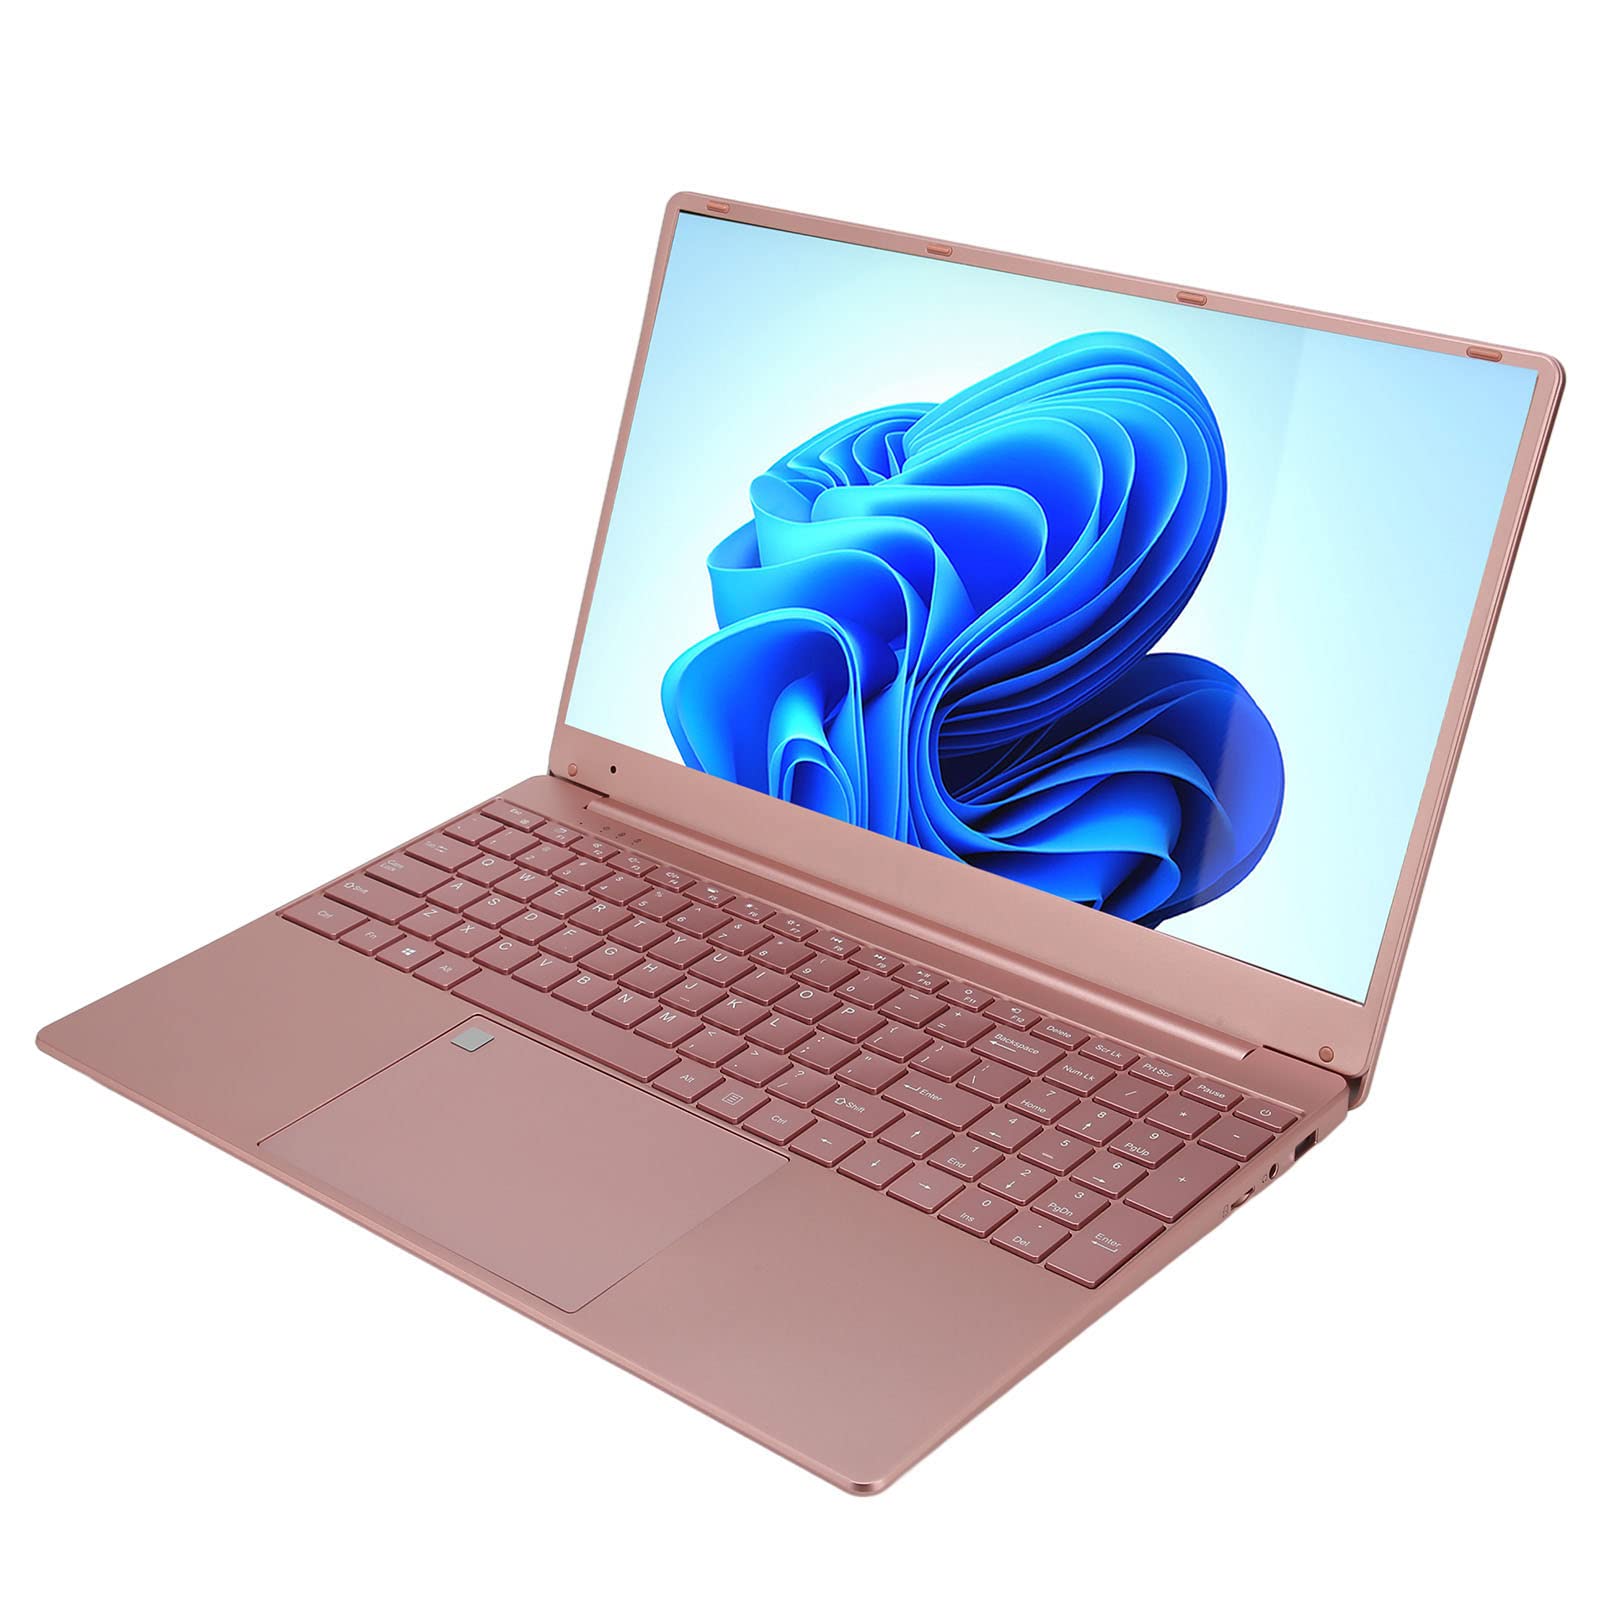 Zopsc 15.6in Laptop for Windows 10, BT, 12+256G, 1920 * 1080, HD 2K IPS Laptop with Fingerprint Unlock and Numeric Keypad for Intel N5095 CPU, Built in Microphone.